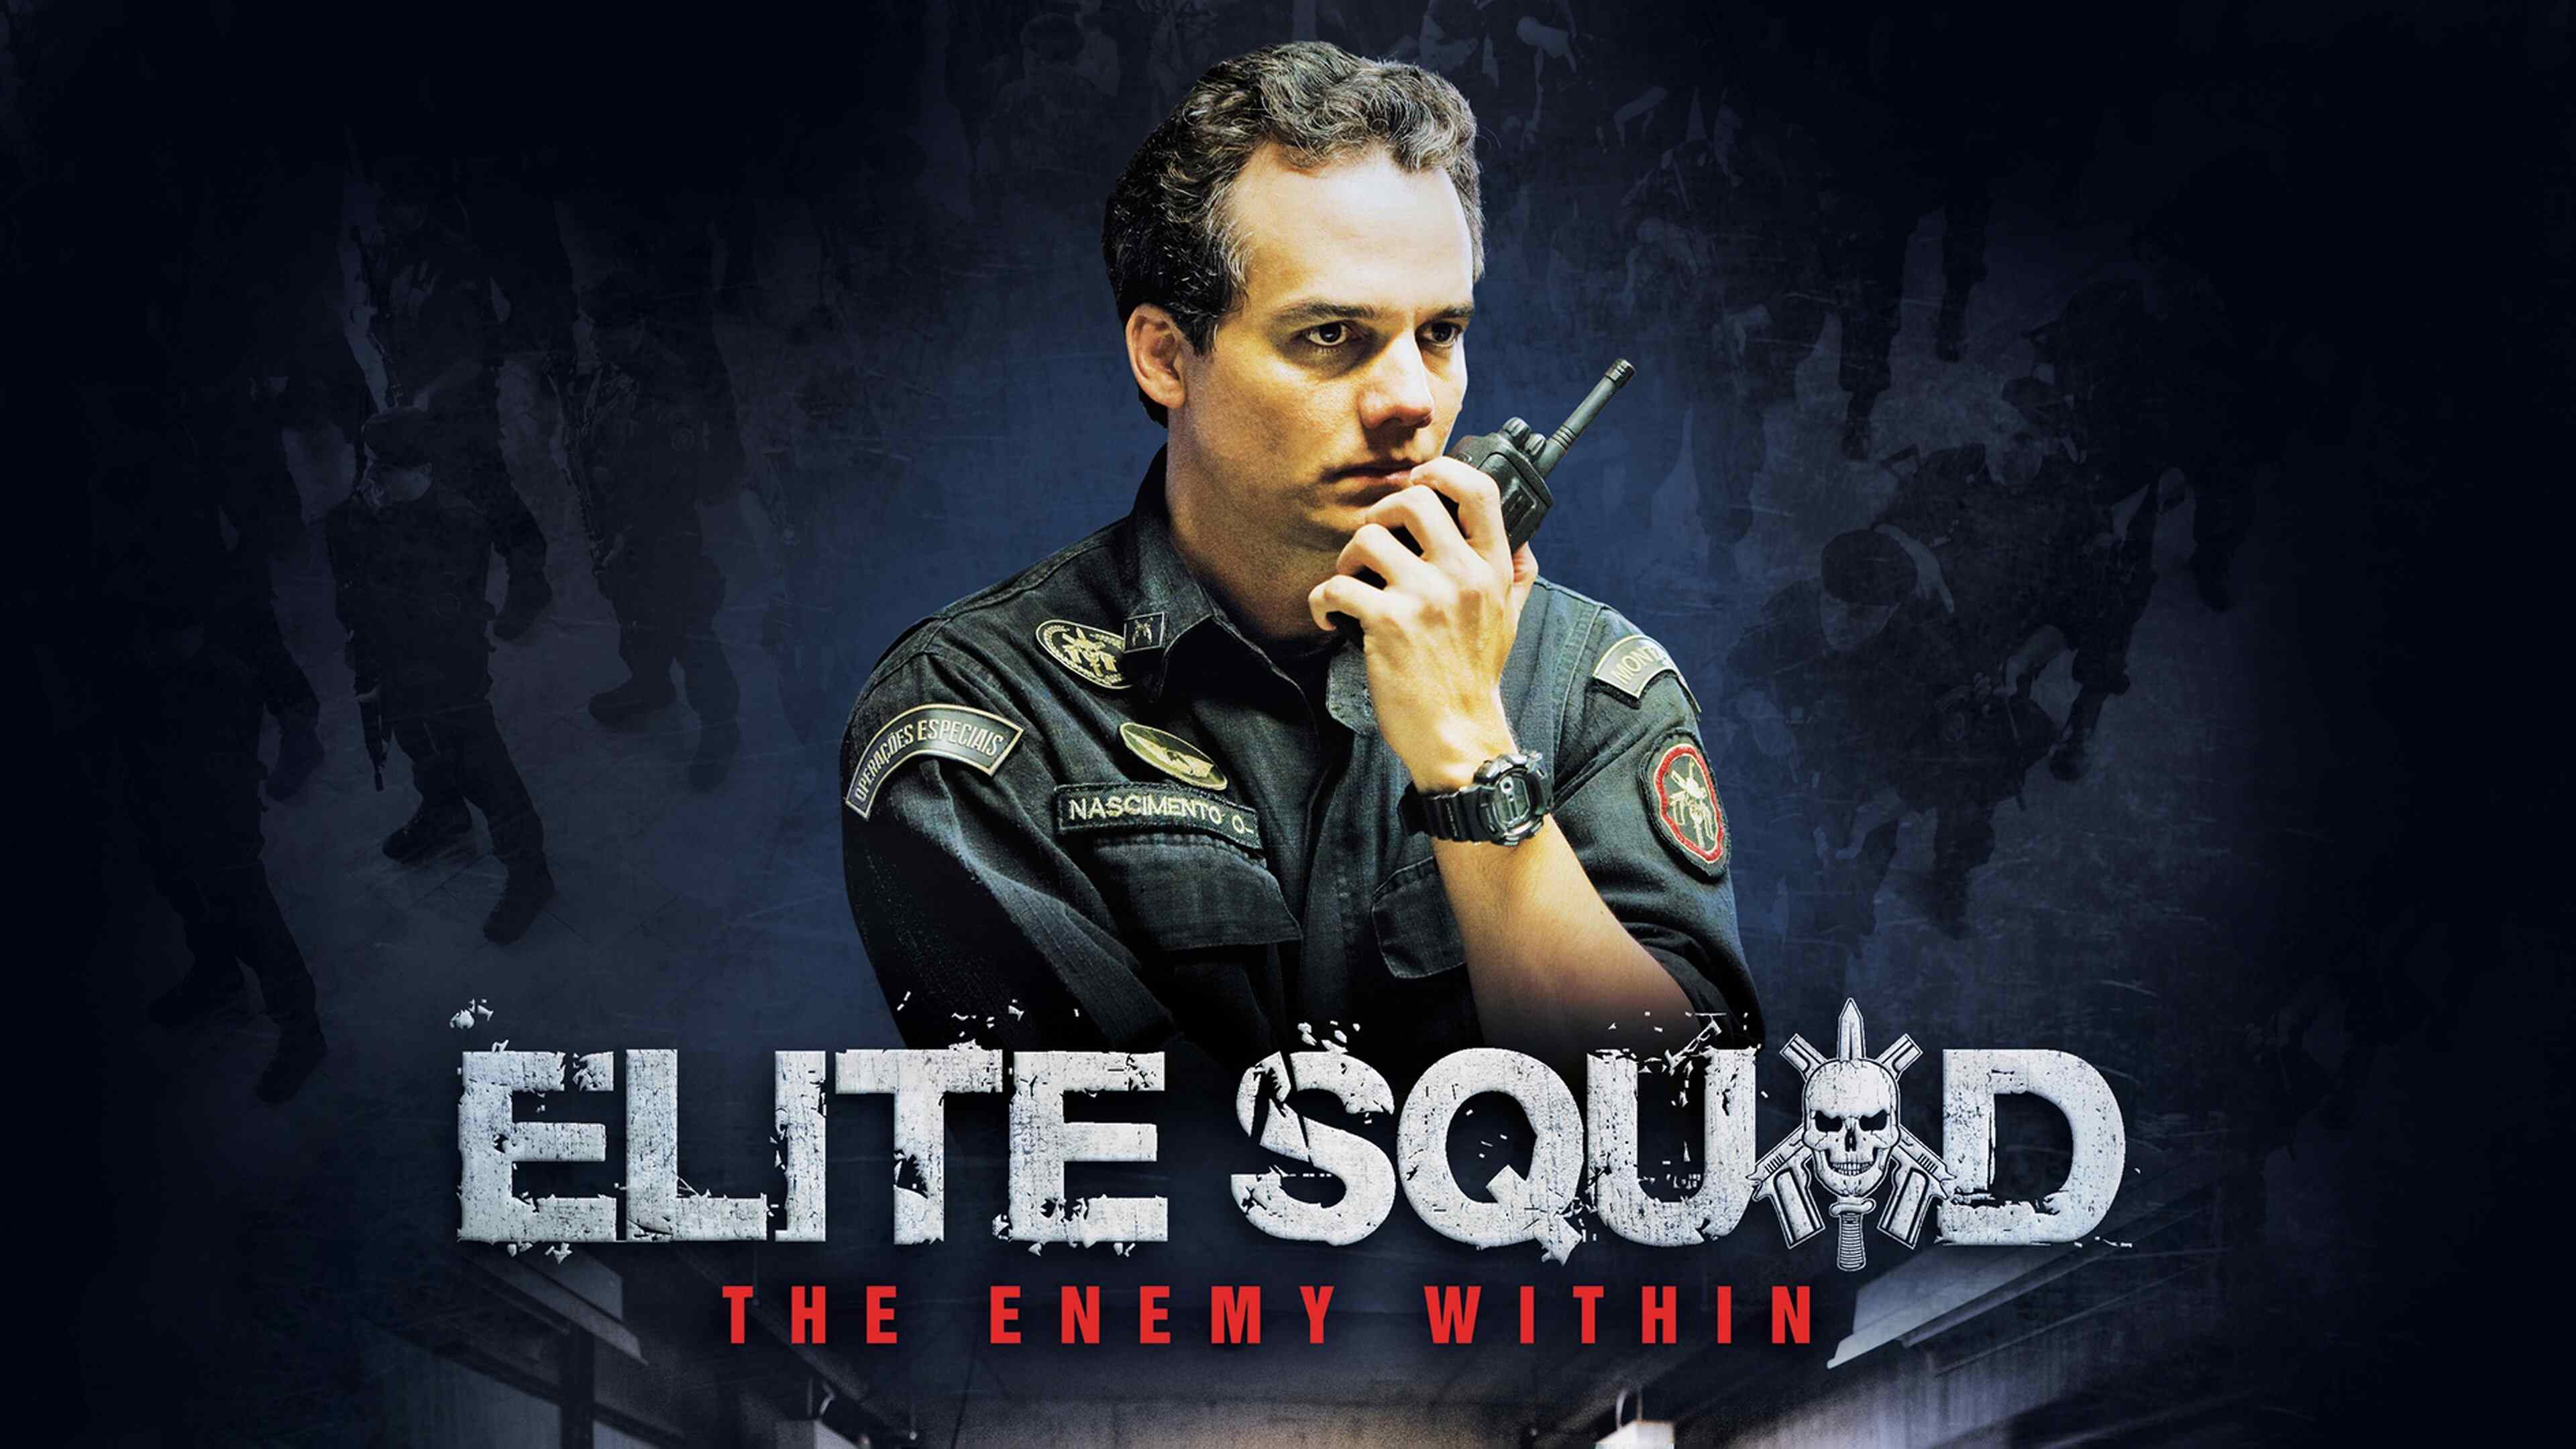 34-facts-about-the-movie-elite-squad-the-enemy-within